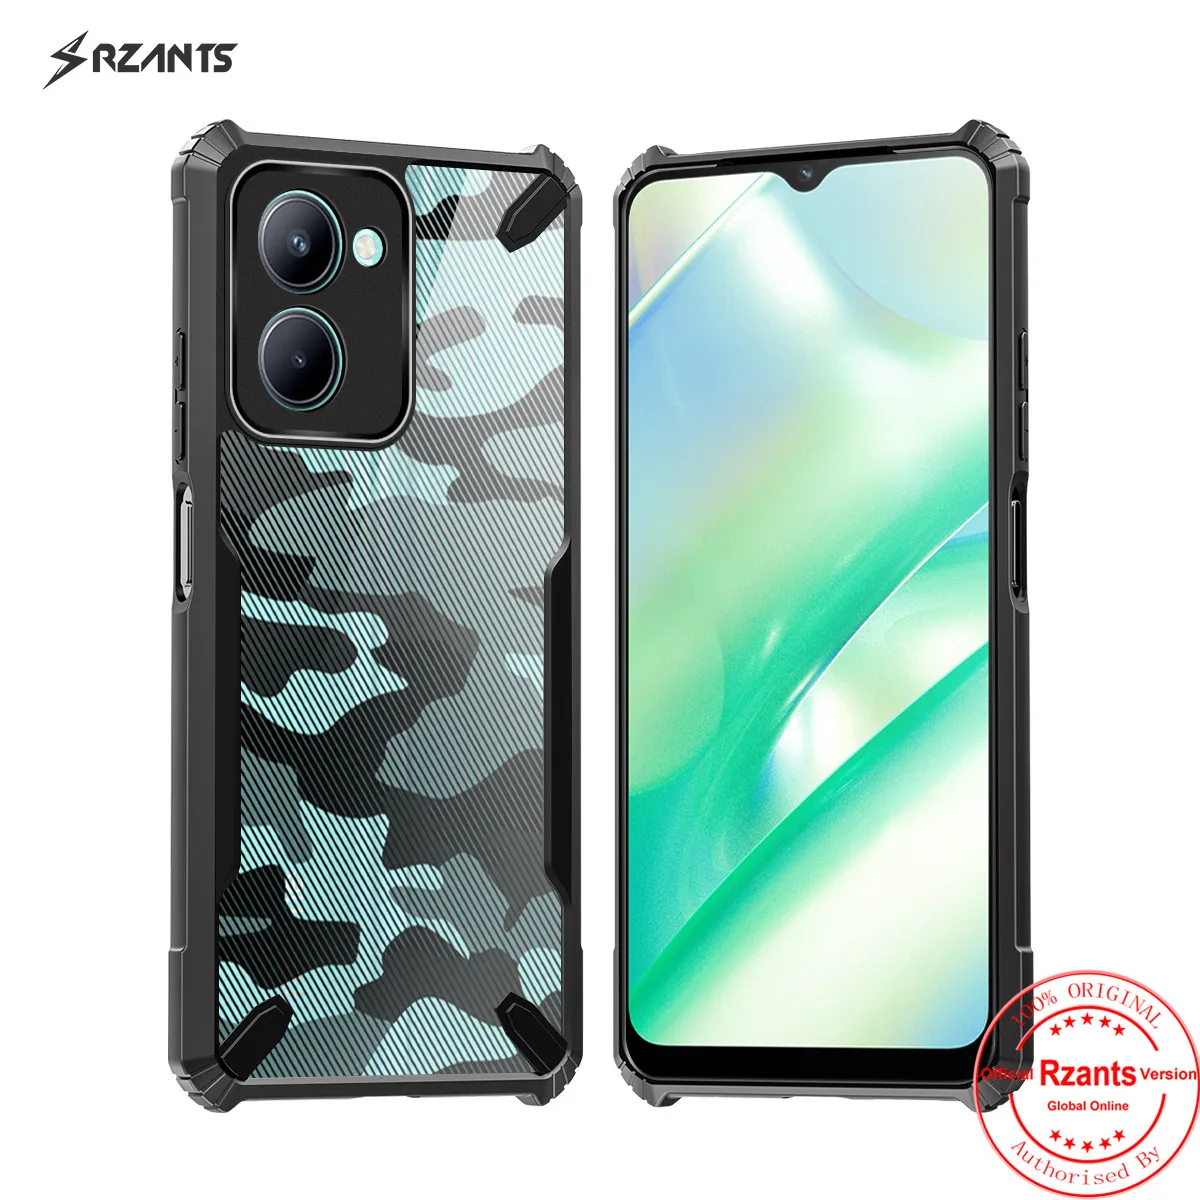 

Rzants For OPPO Realme C33 Case Hard [Camouflage Bull] Shockproof Slim Crystal Clear Cover Funda Thin Casing